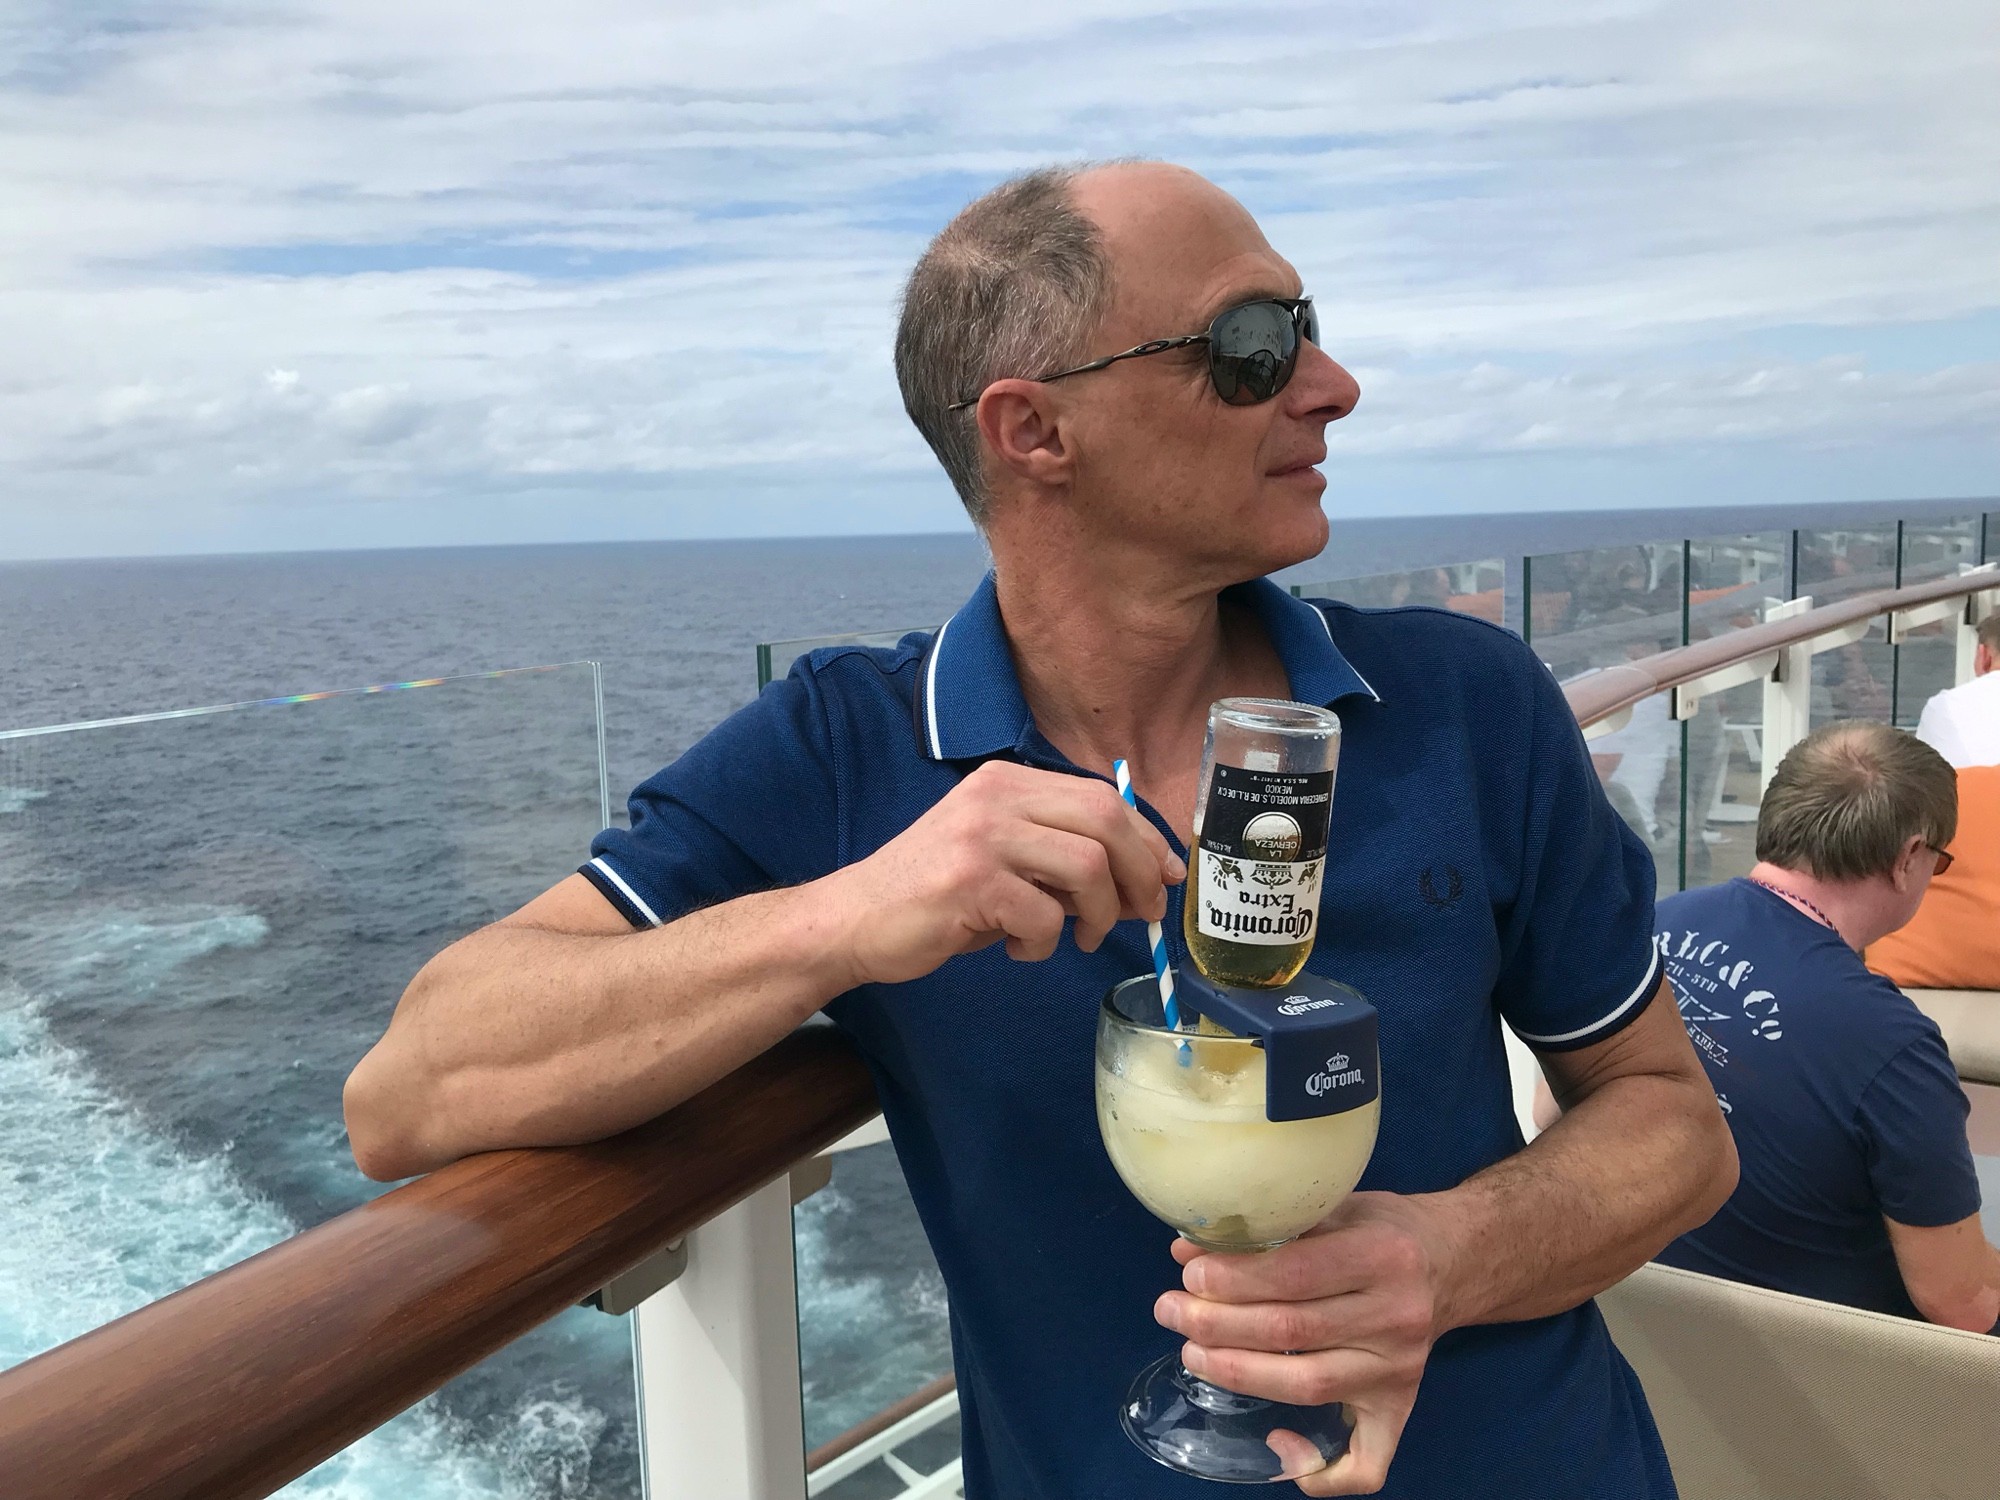 Disembarkation Day — One Last Drink